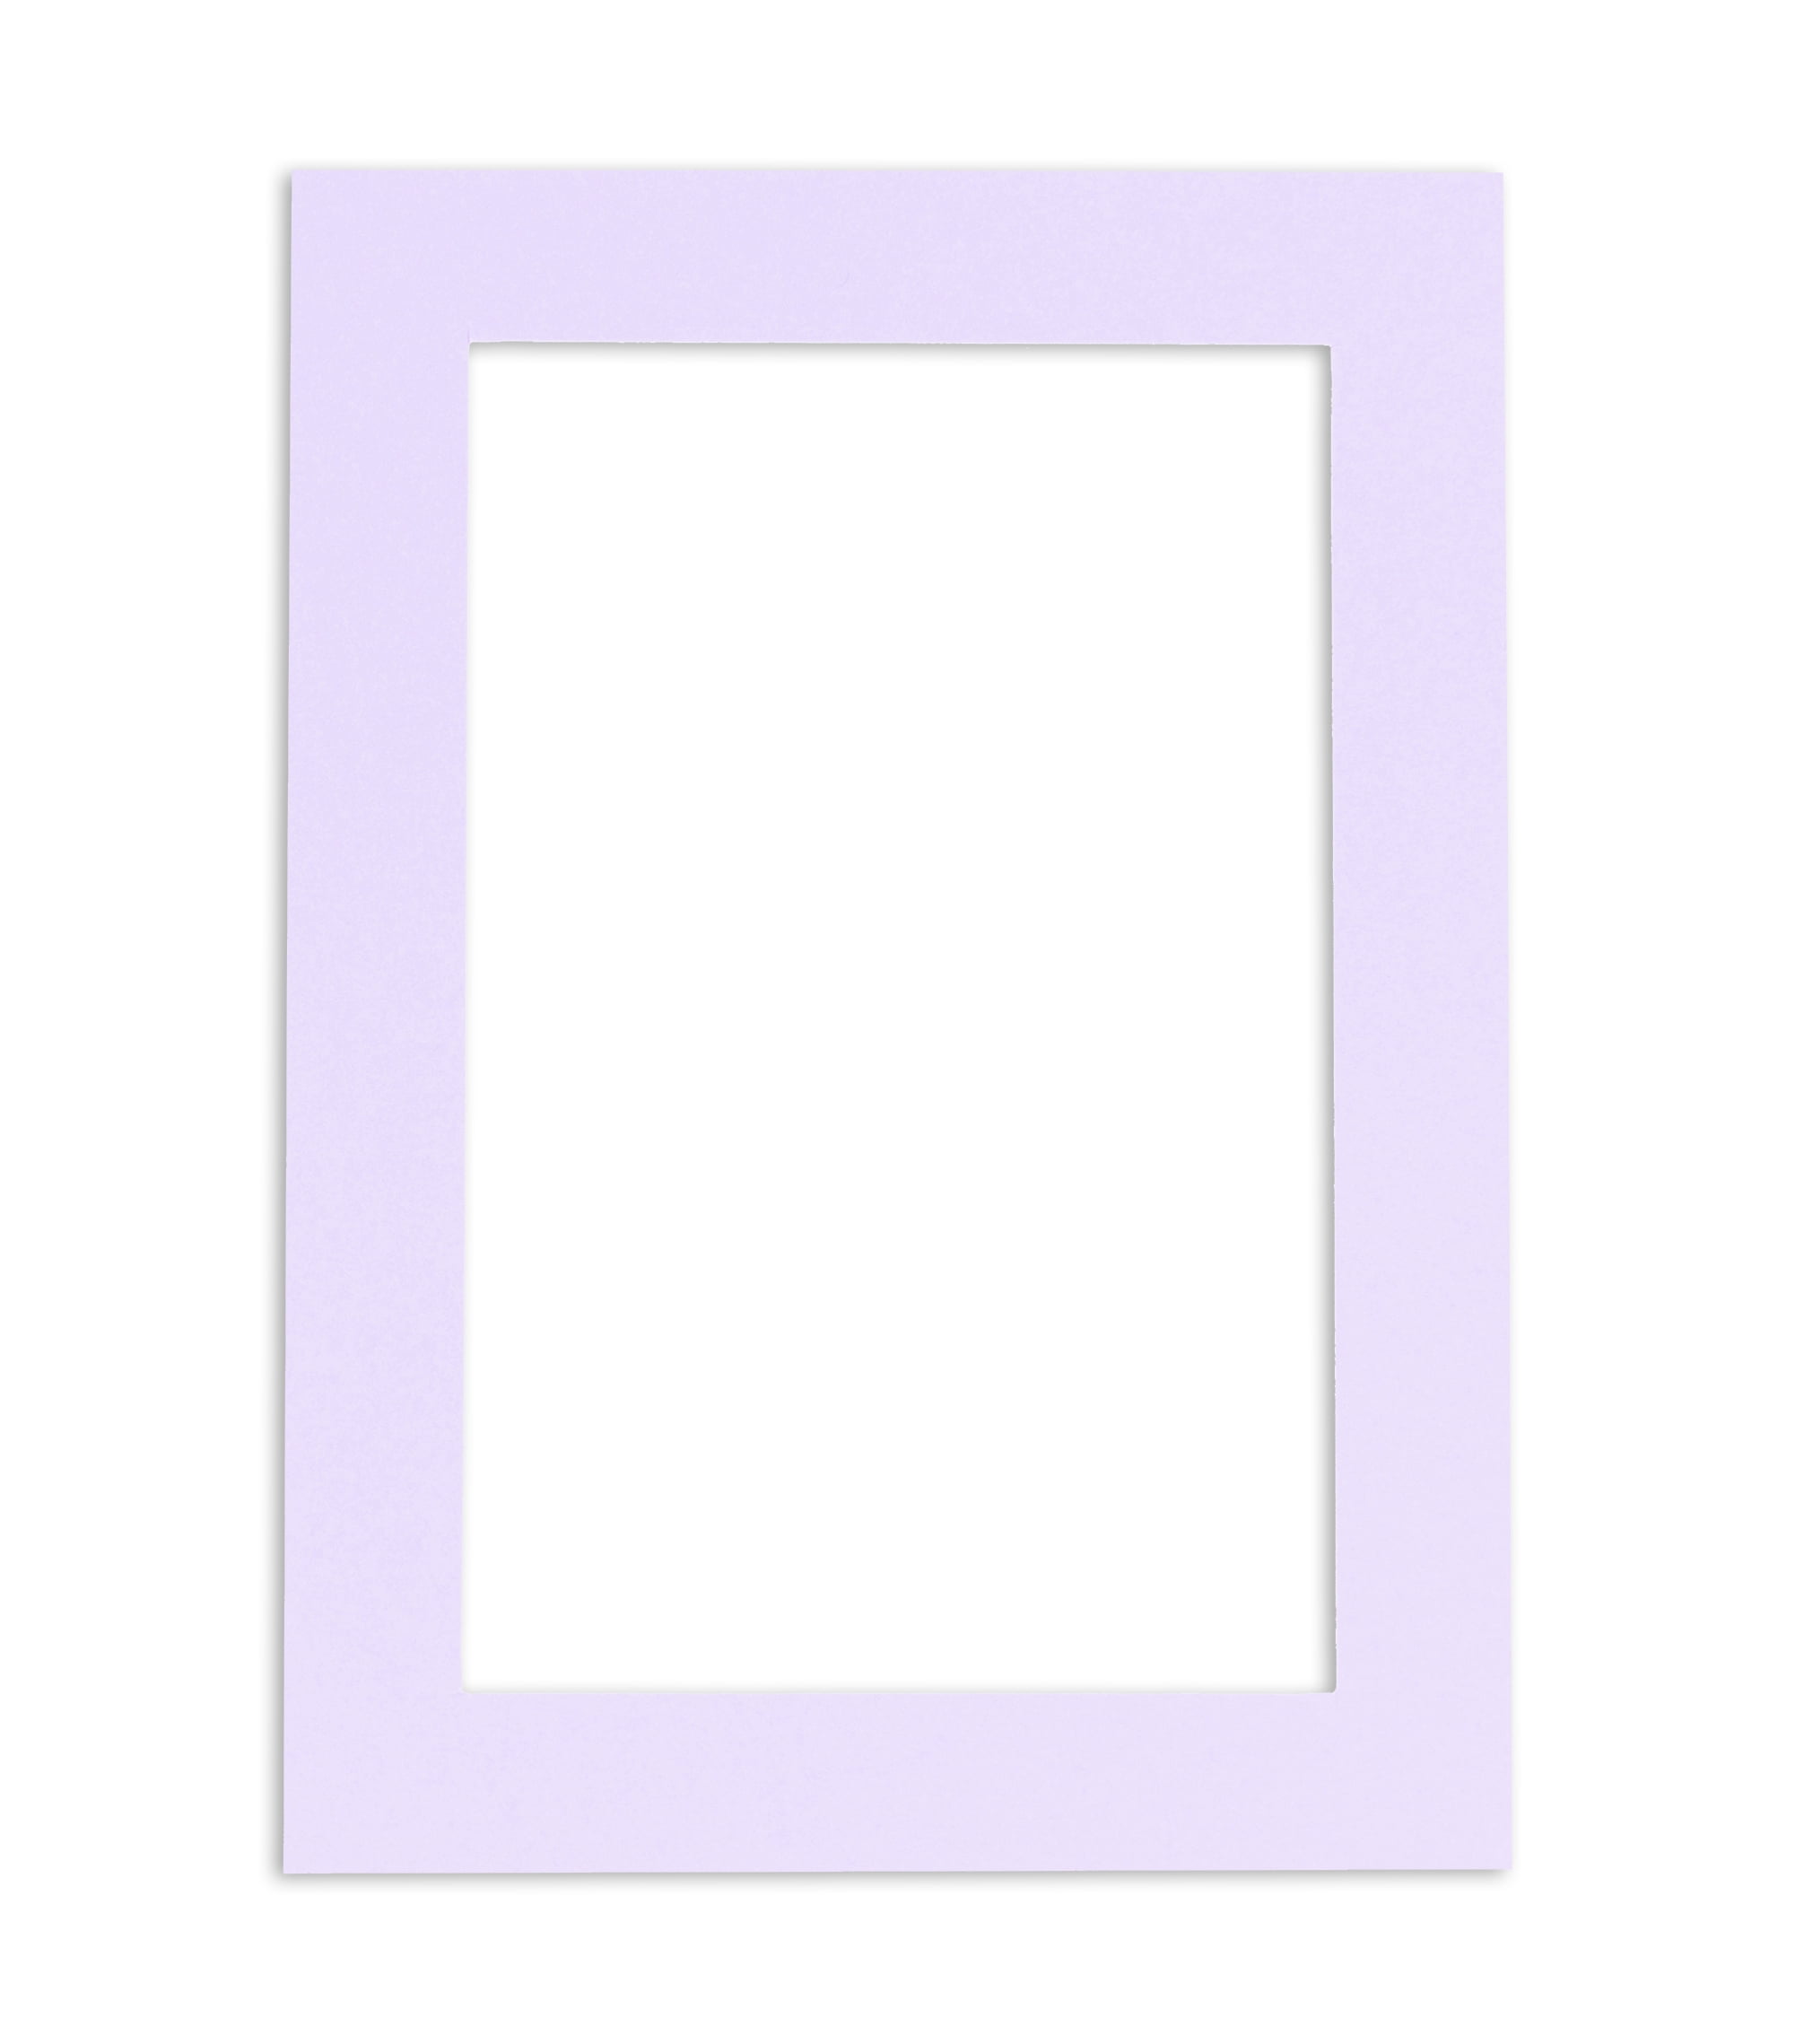 Rattan Acid Free 8x10 Picture Frame Mats with White Core Bevel Cut